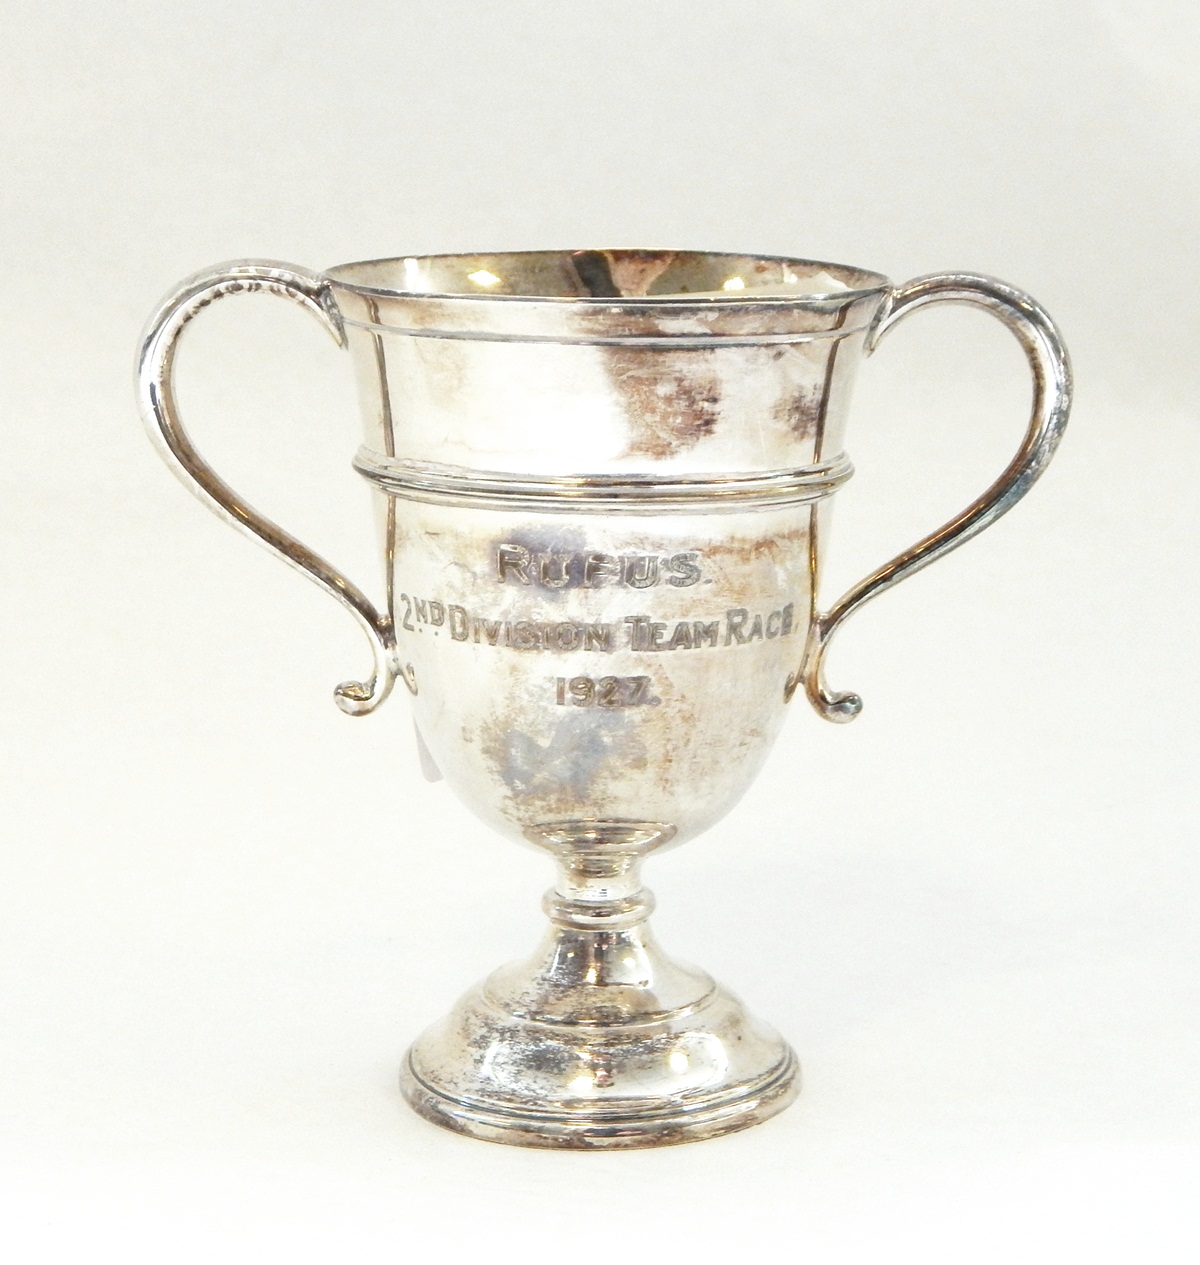 Silver two-handled trophy by H Phillips, London 1928 with presentation inscription, - Image 3 of 4